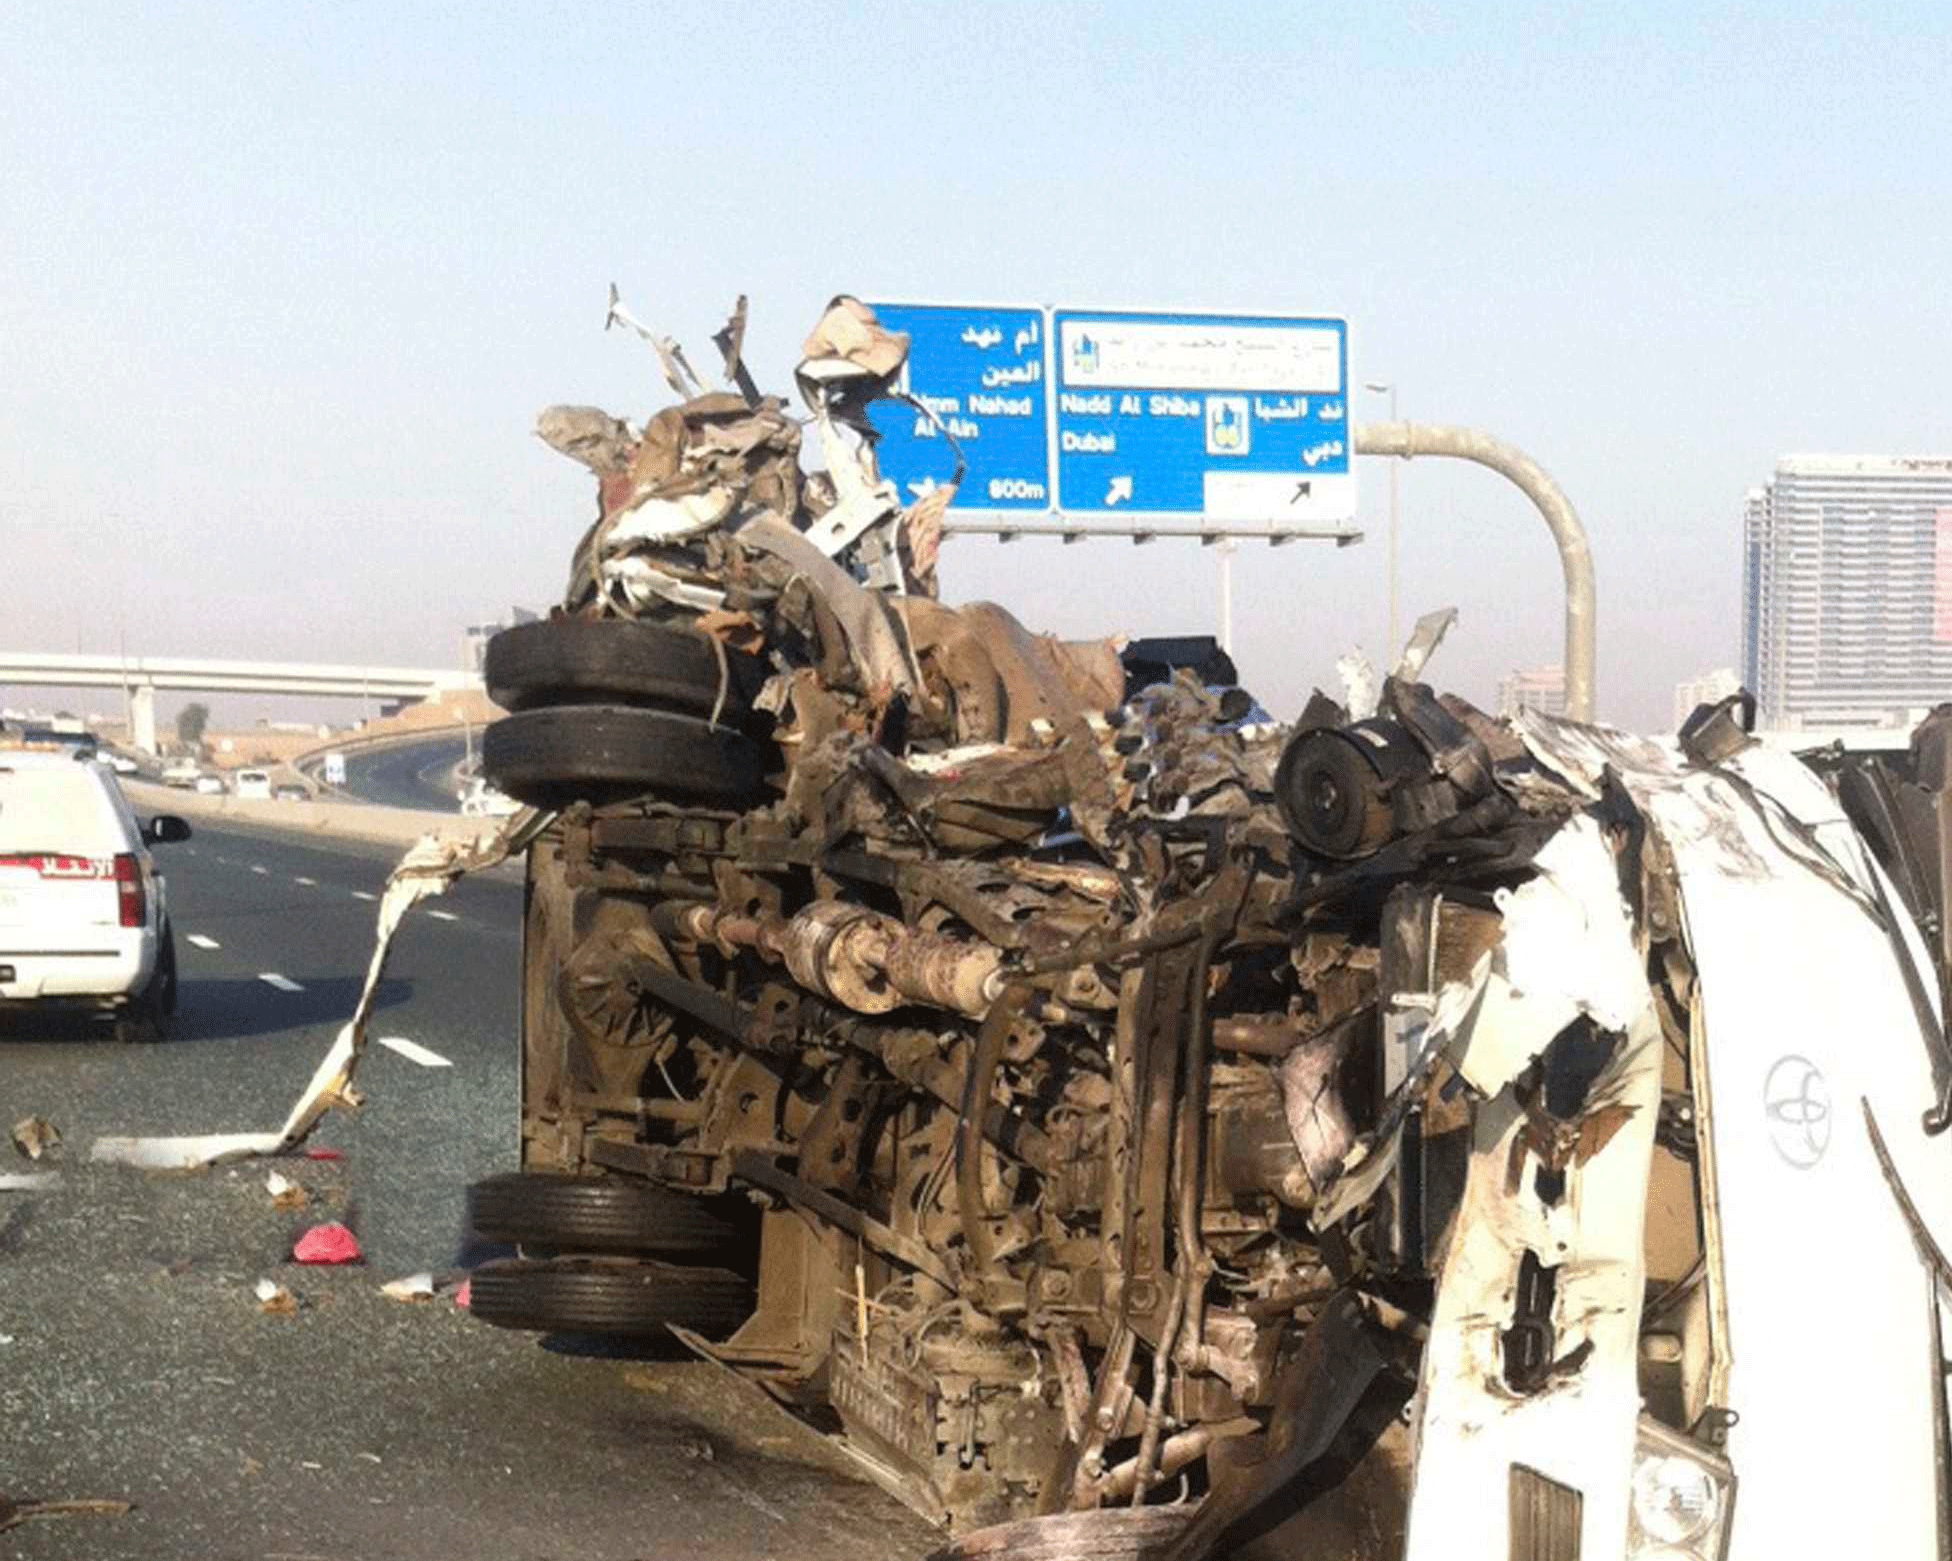 At least nine Indian nationals were among the 13 people killed in Saturday's road accident in the UAE, the Indian consulate in Dubai confirmed Sunday.The accident occurred when their bus rammed into a parked truck near Dubai, The National reported. Reuters